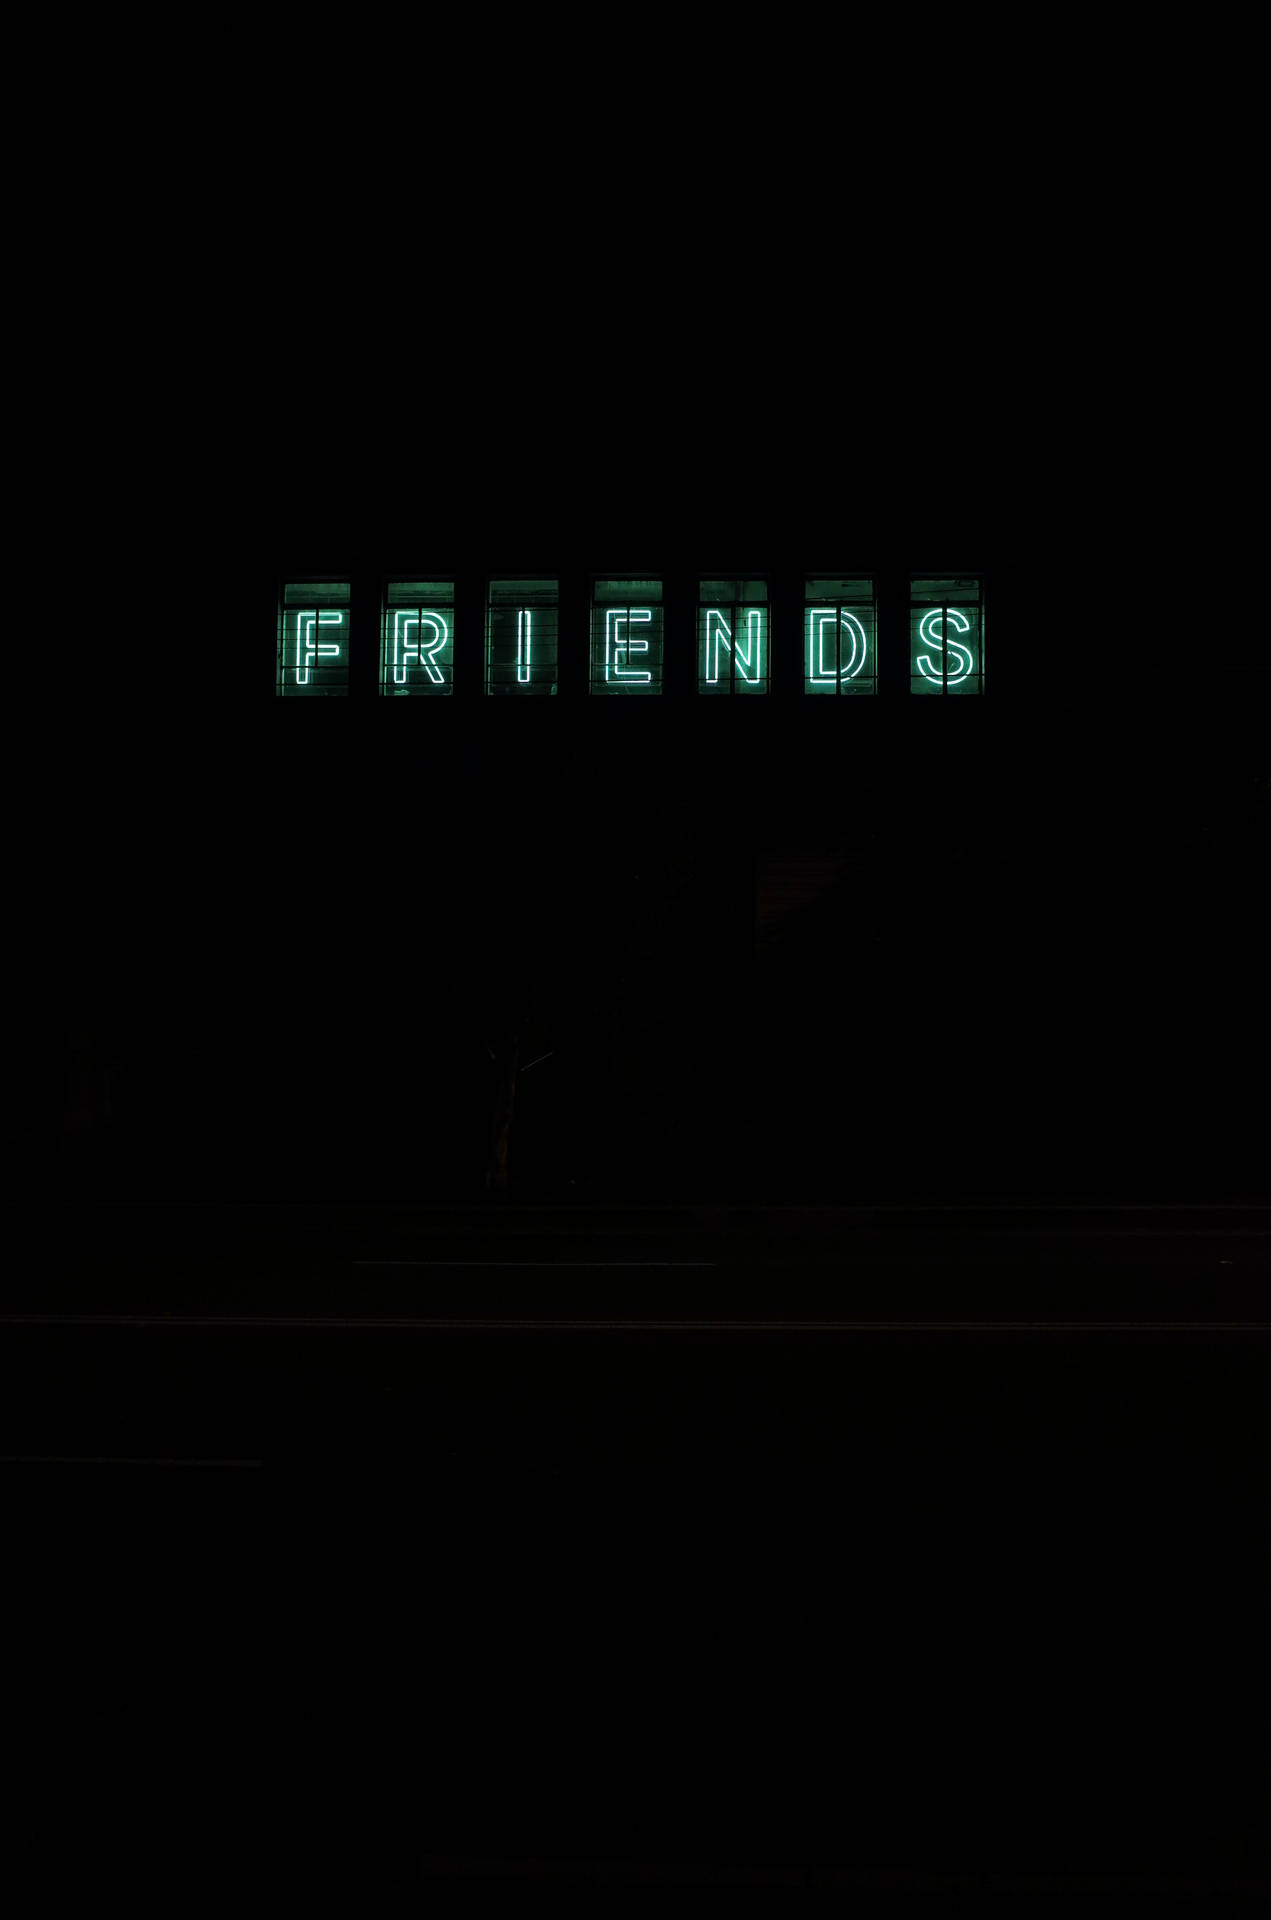 The Power of Friends Wallpaper